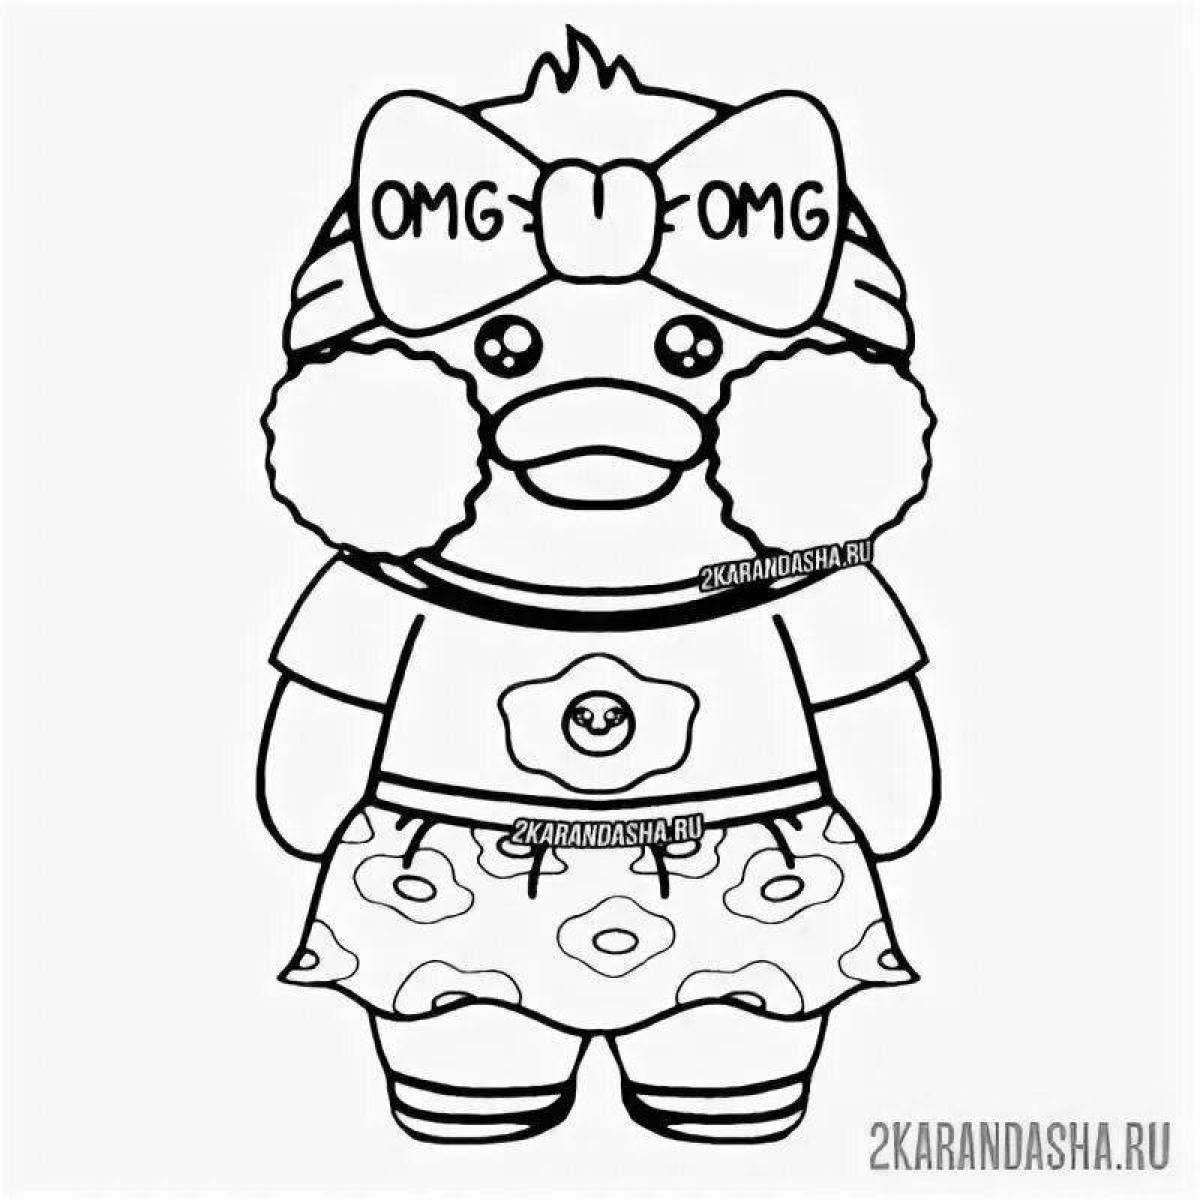 Lafanfan duck coloring page filled with color